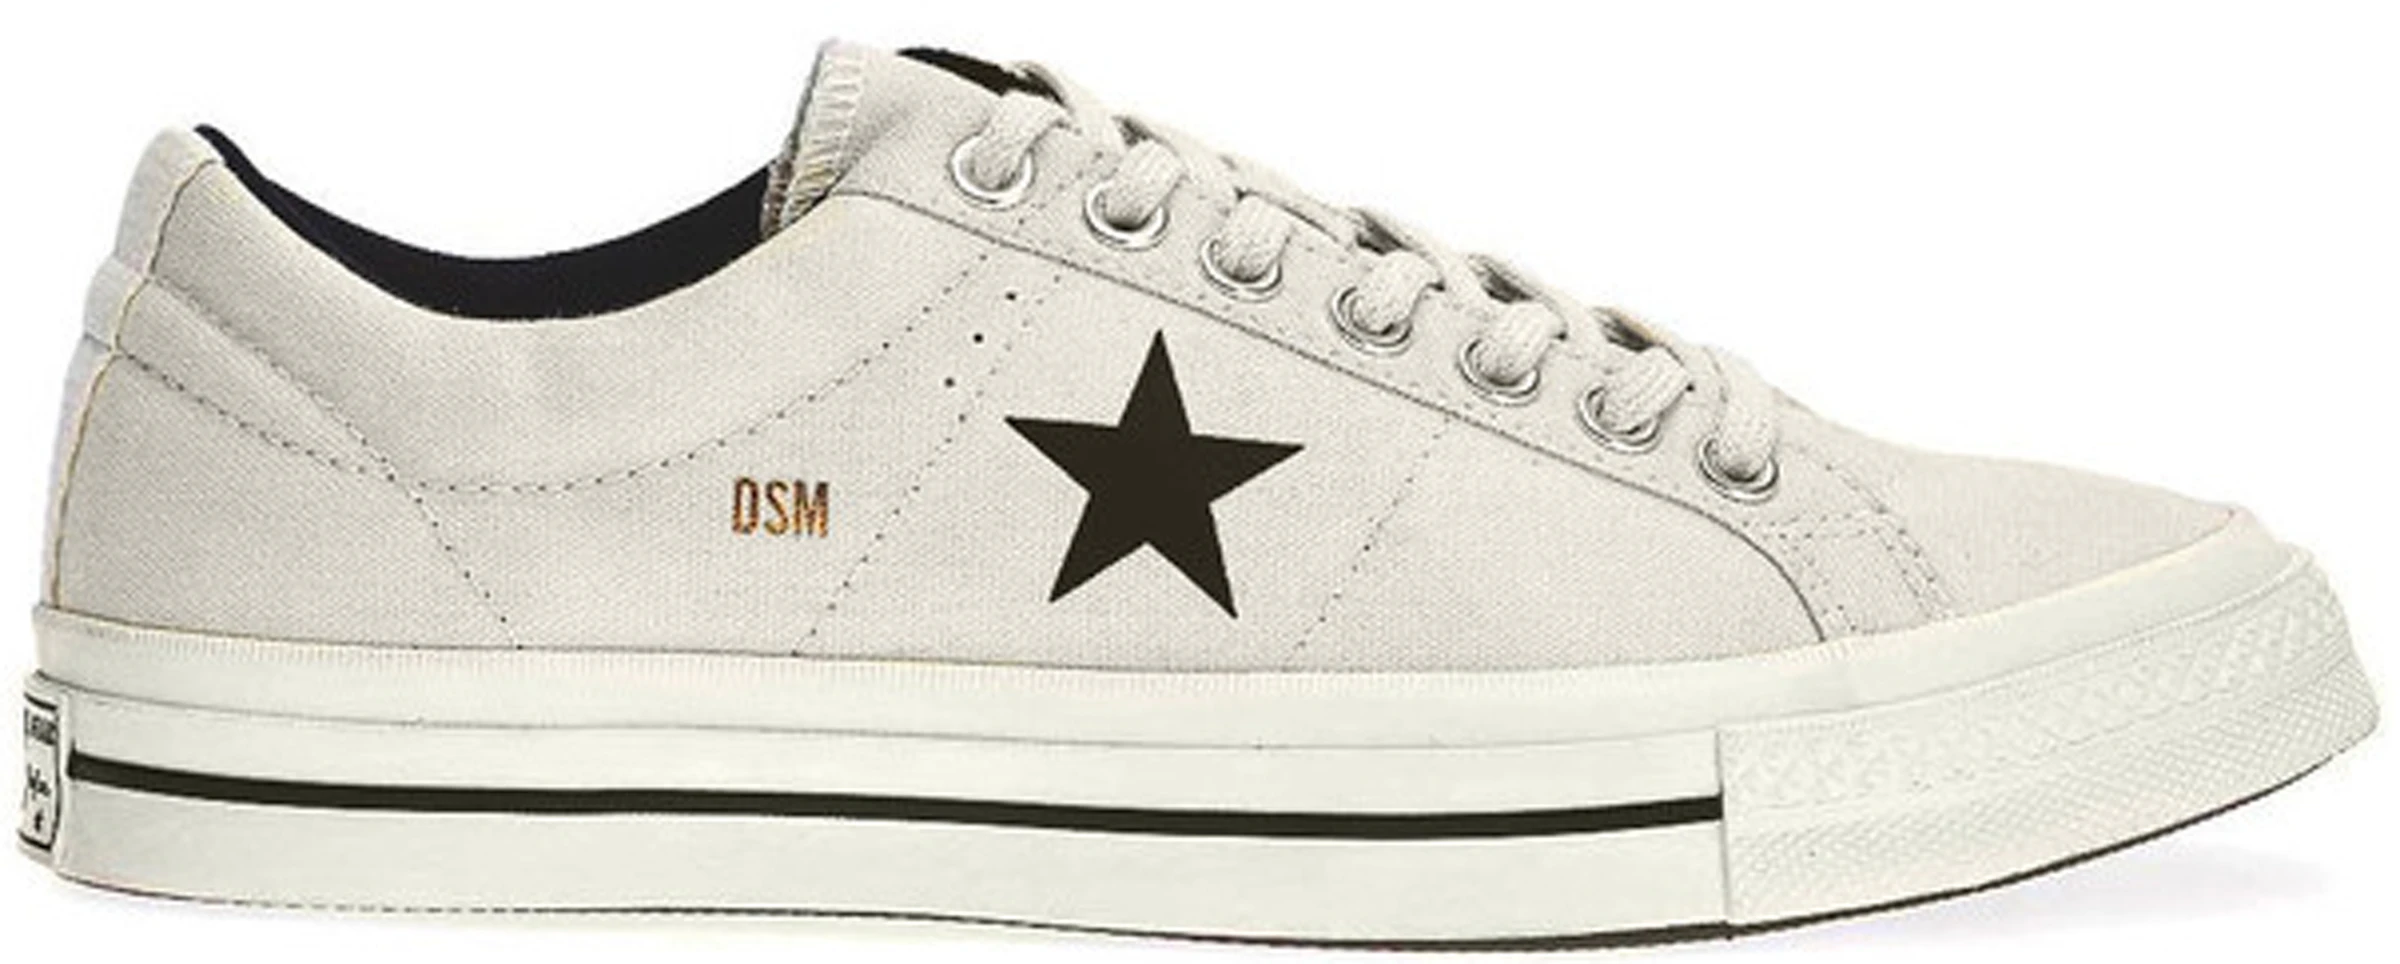 Fjern defile Danmark Converse One Star Canvas Ox Dover Street Market White - 162293C - US